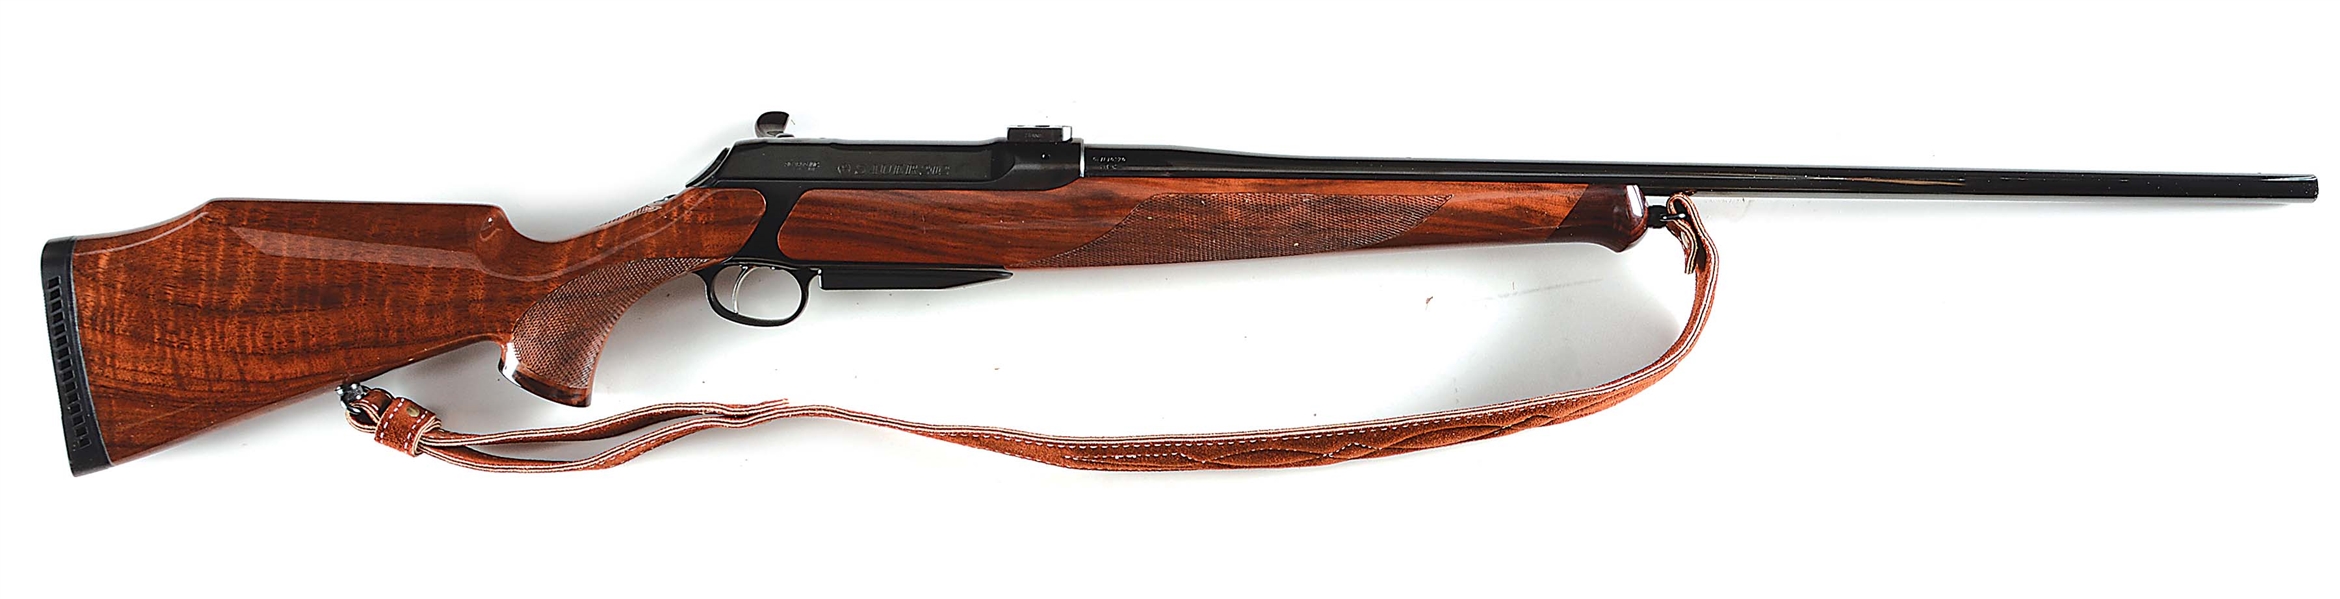 (M) ONE  SAUER AND SOHN  LH BOLT ACTION RIFLE IN 7MM REMINGTON MAGNUM WITH ACCESSORIES.